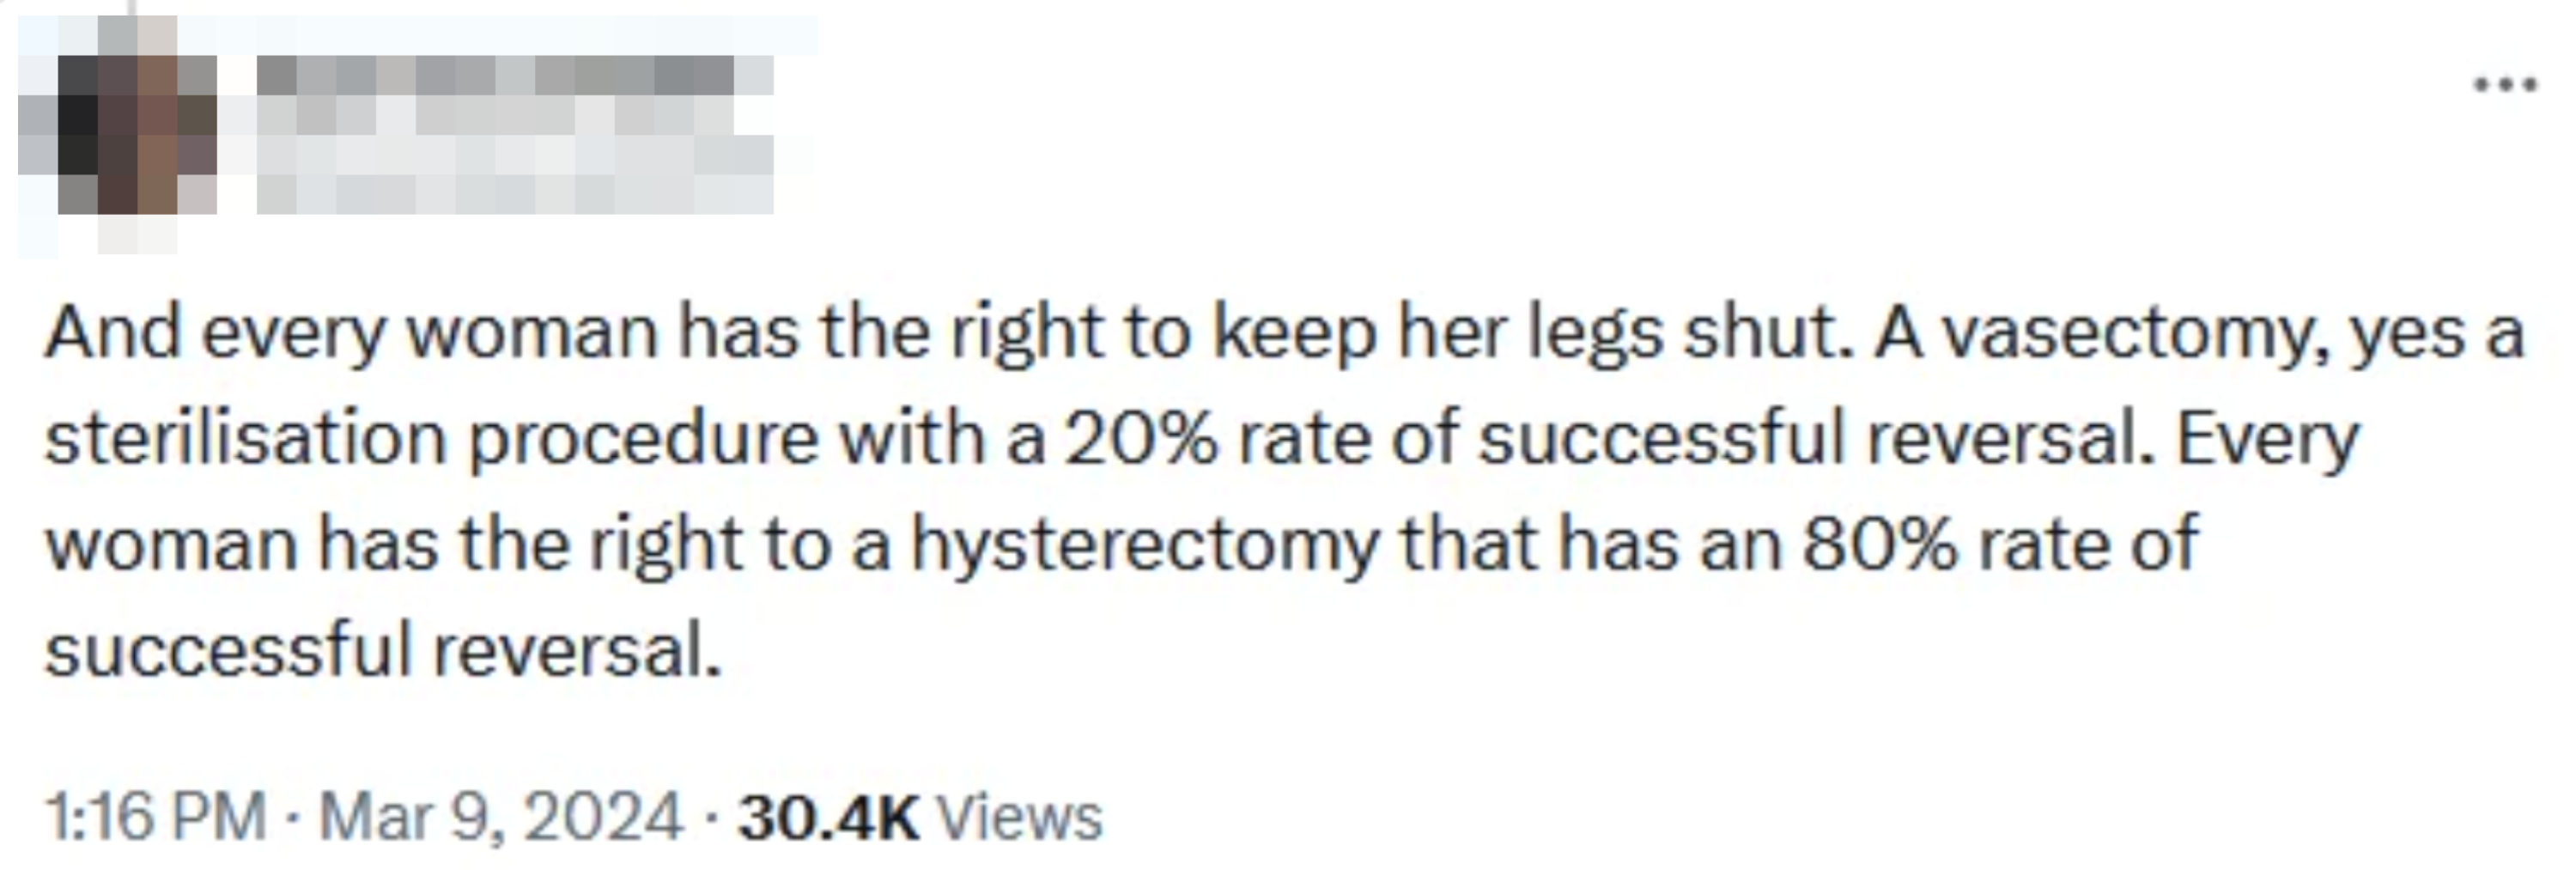 Tweet discussing women&#x27;s rights to vasectomy and hysterectomy with respective success reversal rates